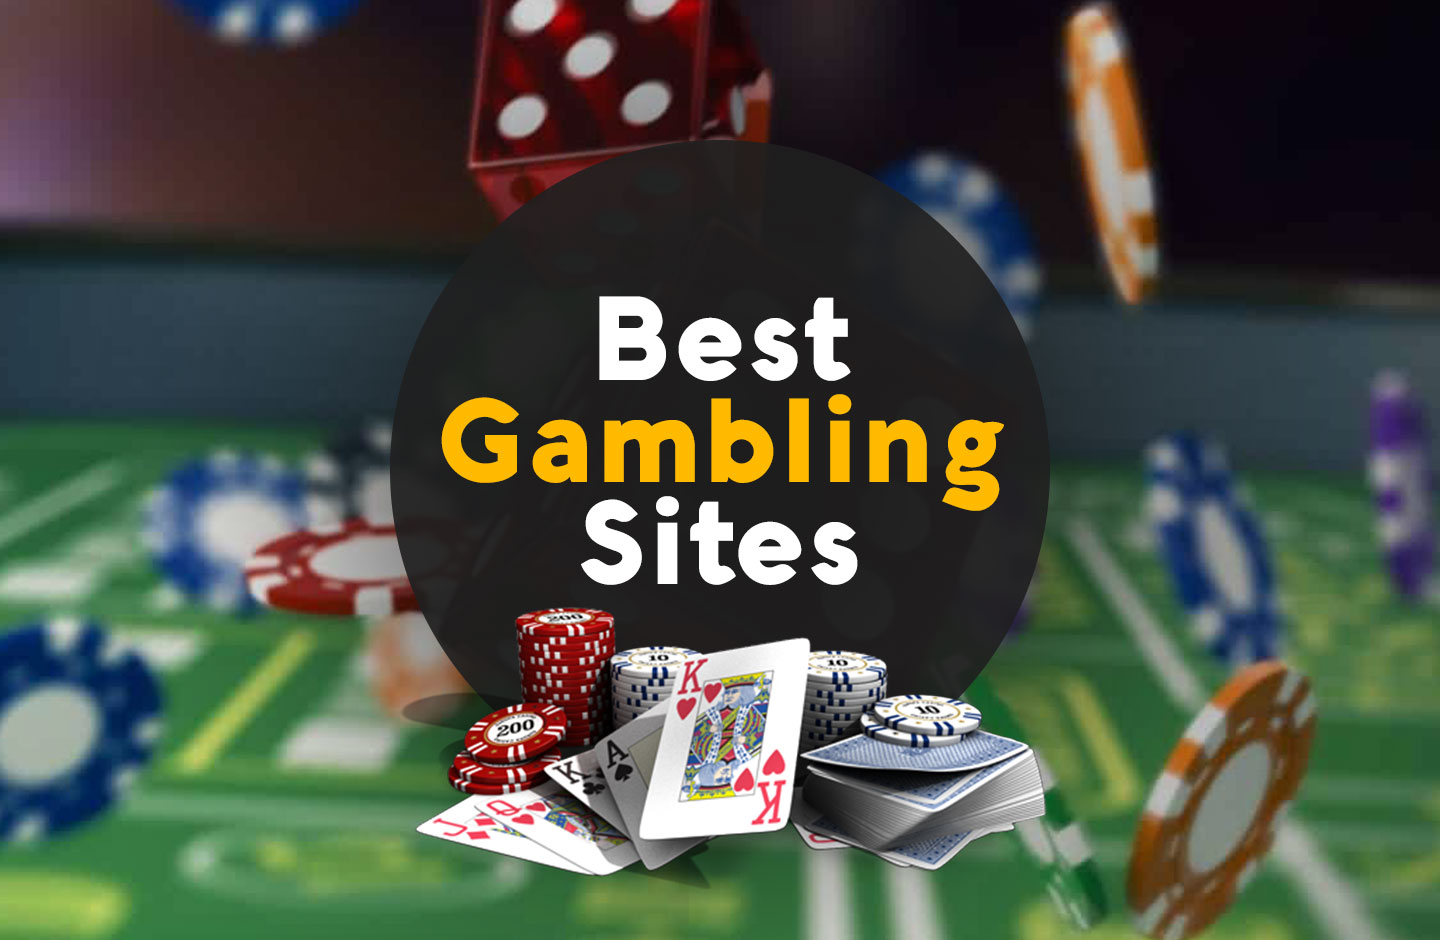 5 Surefire Ways The Impact of Technology on the Future of Online Gambling in Turkey Will Drive Your Business Into The Ground